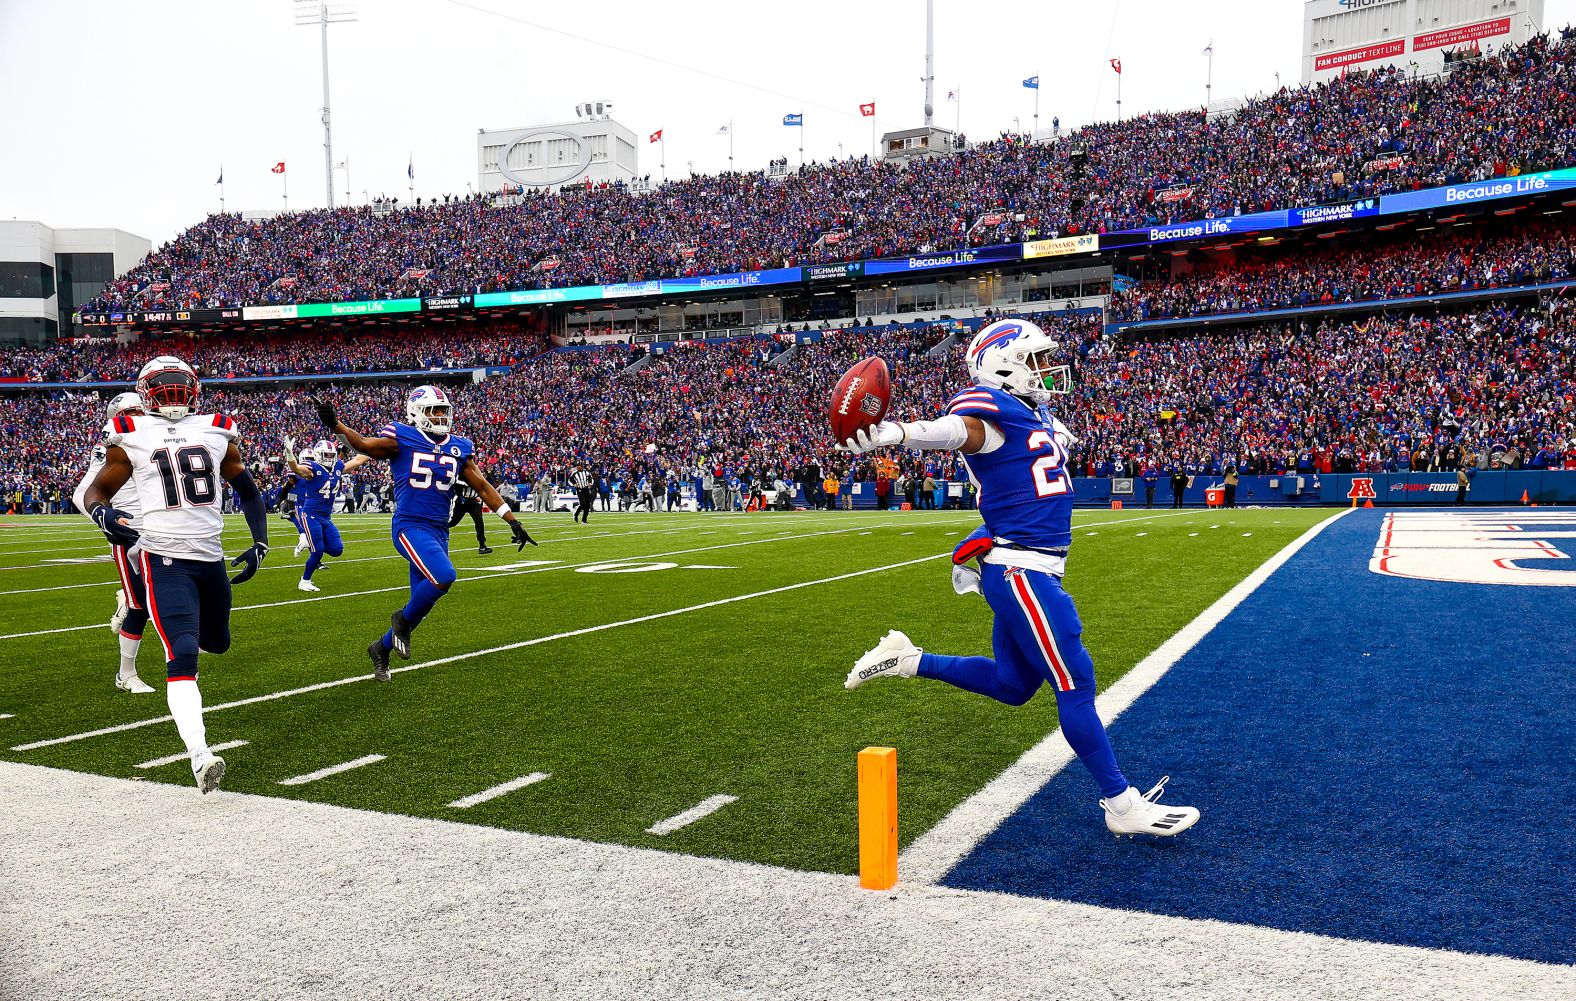 Buffalo's Nyheim Hines runs back the opening kickoff for a touchdown during the Bills' 35-23 win over New England on Sunday, January 8. It was the NFL team's <a href="index.php?page=&url=https%3A%2F%2Fwww.cnn.com%2F2023%2F01%2F09%2Fsport%2Fbuffalo-bills-nyheim-hines-touchdown-damar-hamlin-spt-intl%2Findex.html" target="_blank">first play since teammate Damar Hamlin suffered a cardiac arrest</a> during a game on January 2. Hamlin celebrated the moment while recovering in the hospital.